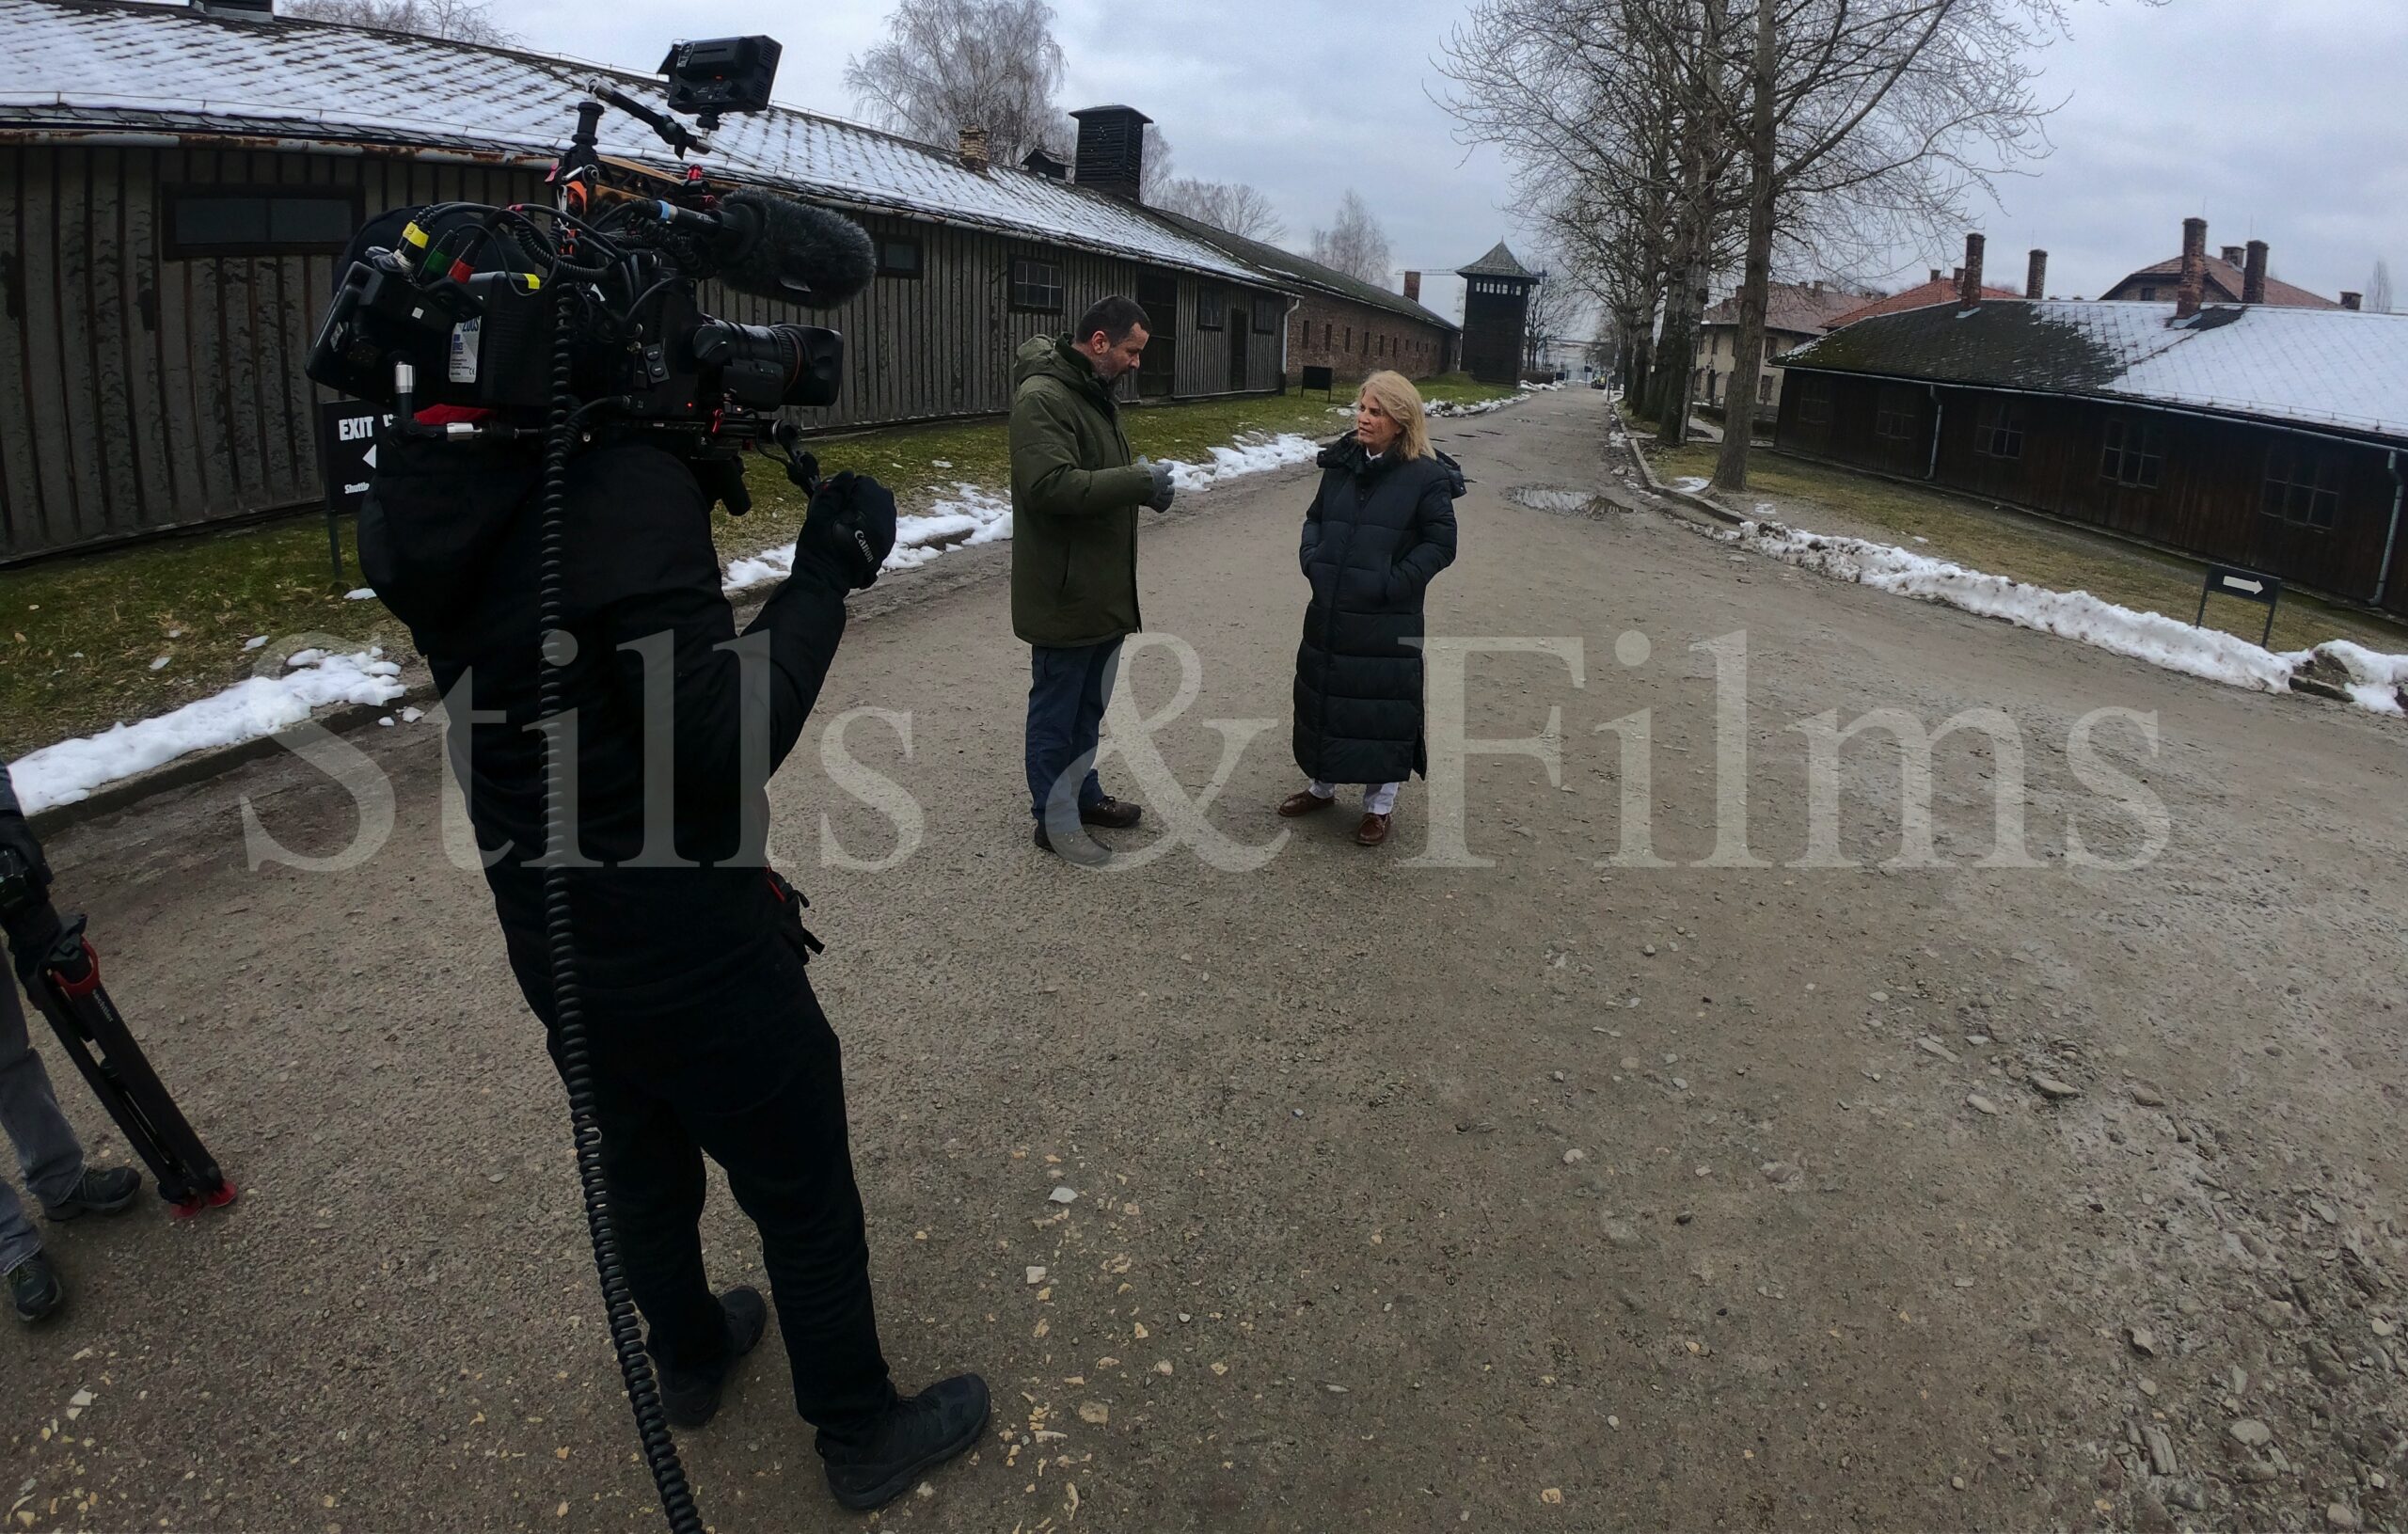 Filming in Auschwitz, Poland for a US client